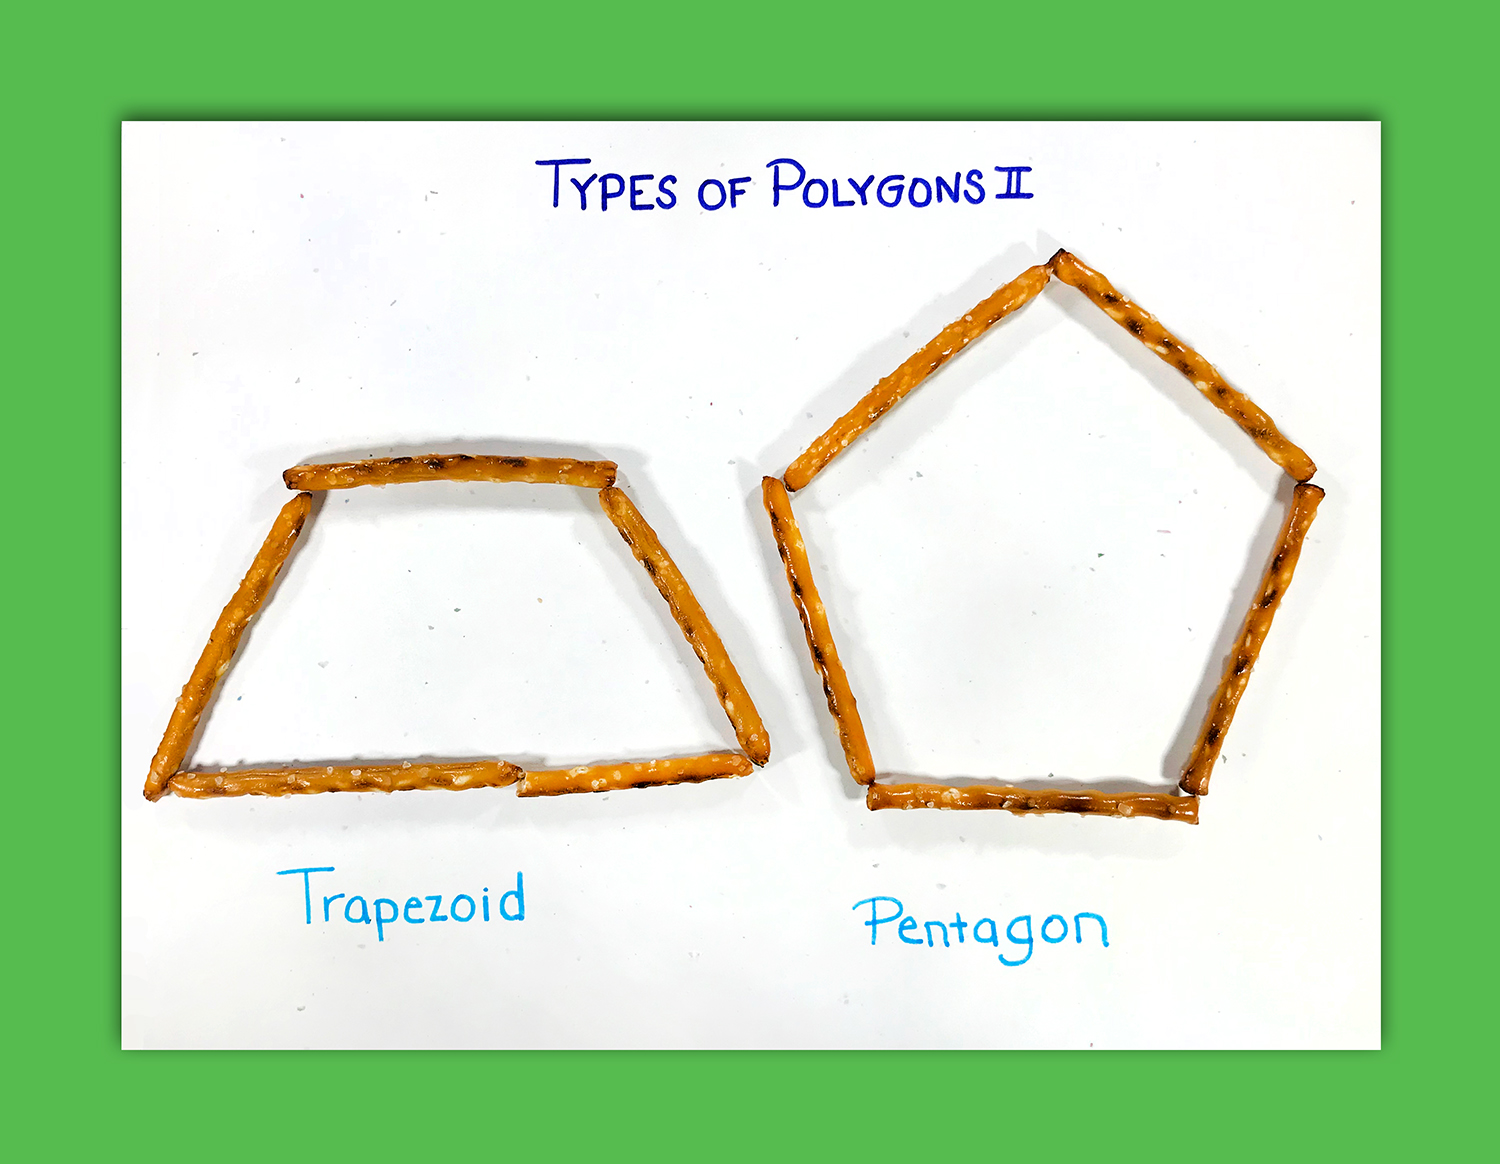 Making Polygons With Pretzels